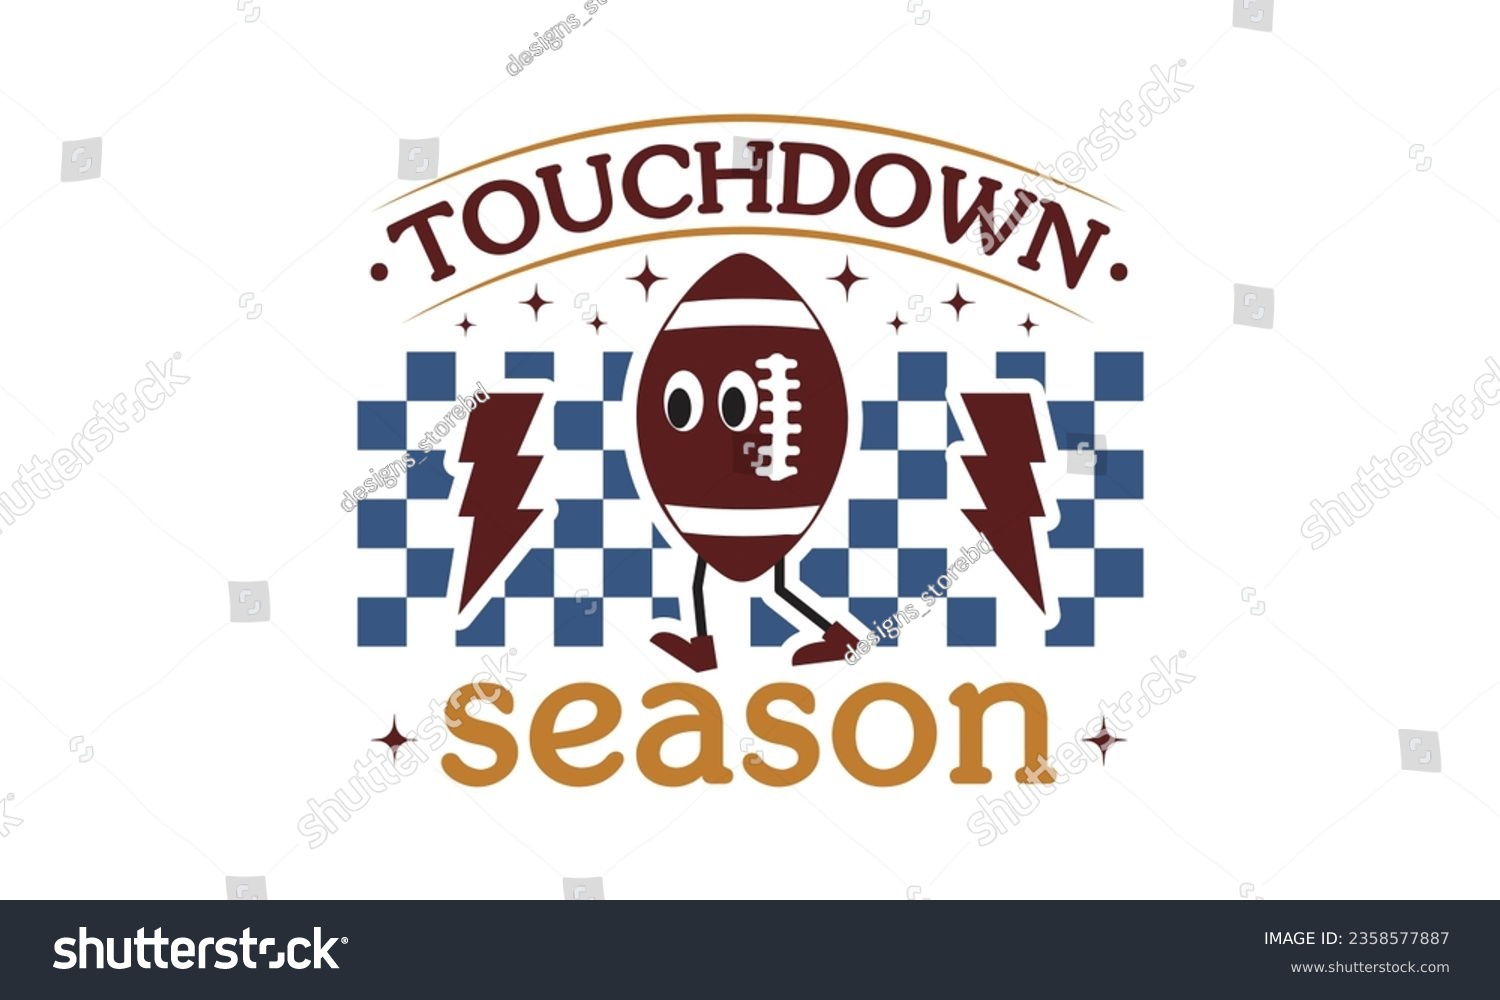 SVG of Touchdown season svg, Football SVG, Football T-shirt Design Template SVG Cut File Typography, Files for Cutting Cricut and Silhouette Cut svg File, Game Day eps, png svg